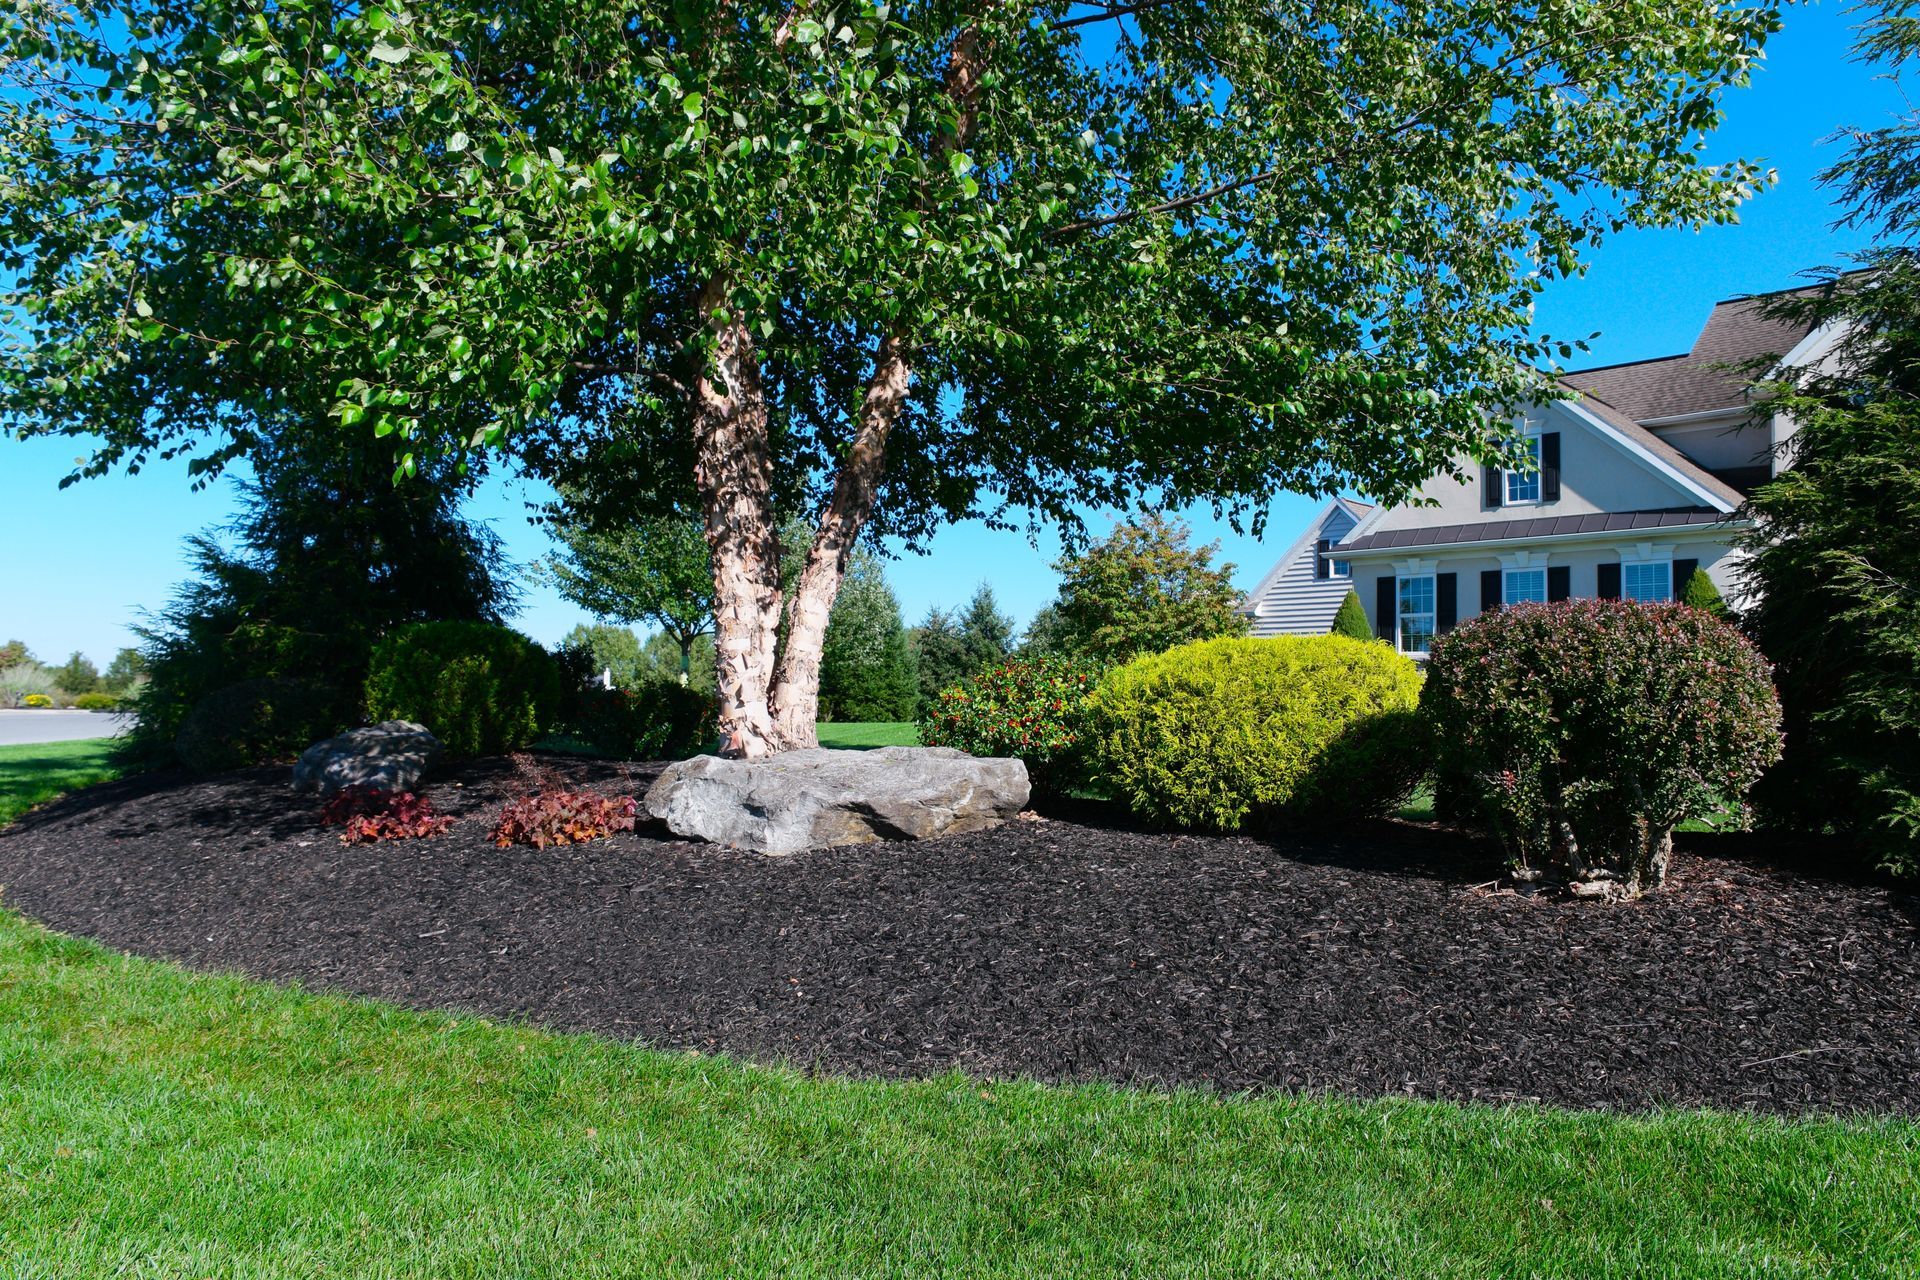 Bulk Colonial Black Dyed Mulch For Sale near me delivered to Lebanon, Annville, Palmyra, & Cornwall.